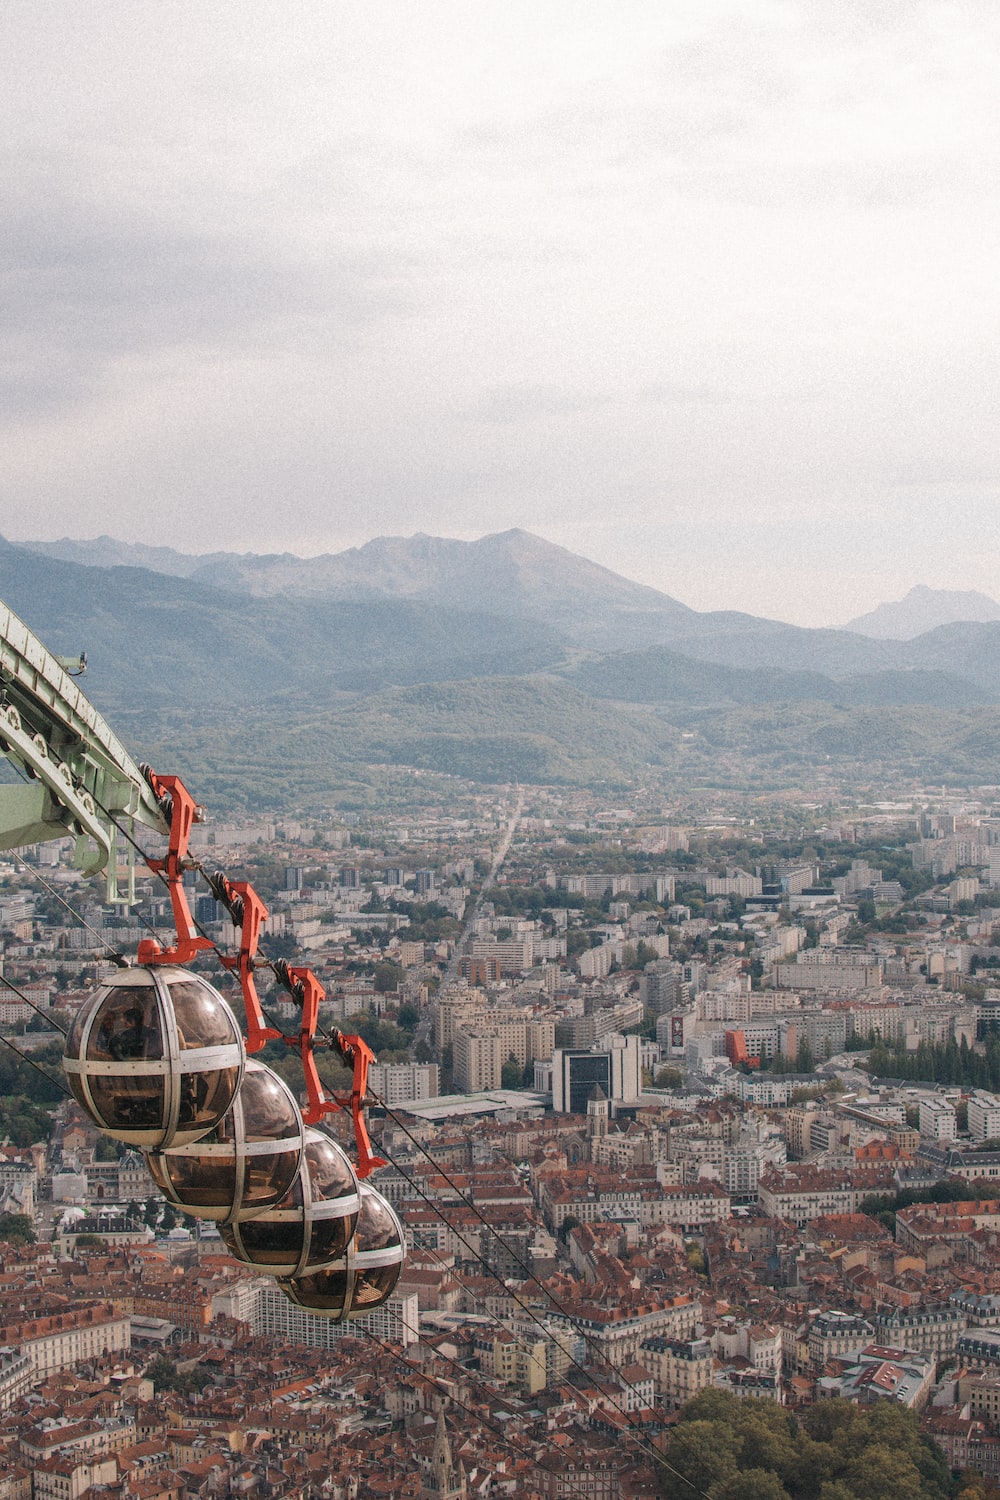 Grenoble Picture. Download Free Image